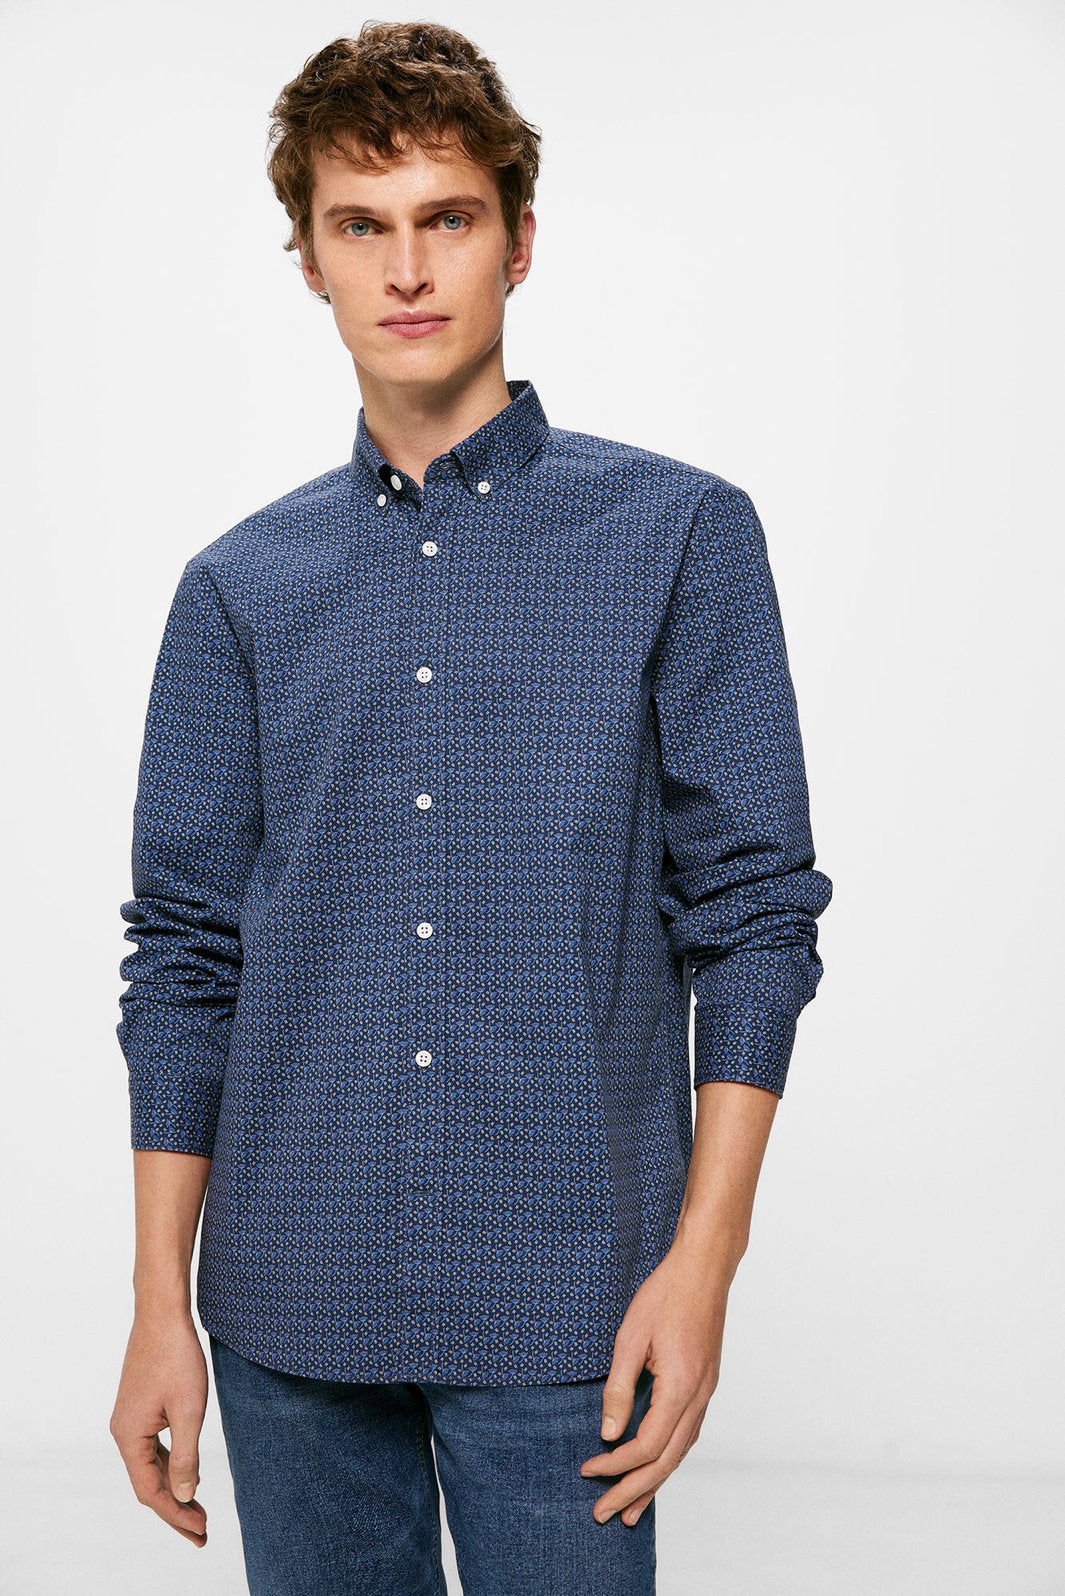 Button Down Shirt With All Over Print_1517702_11_06